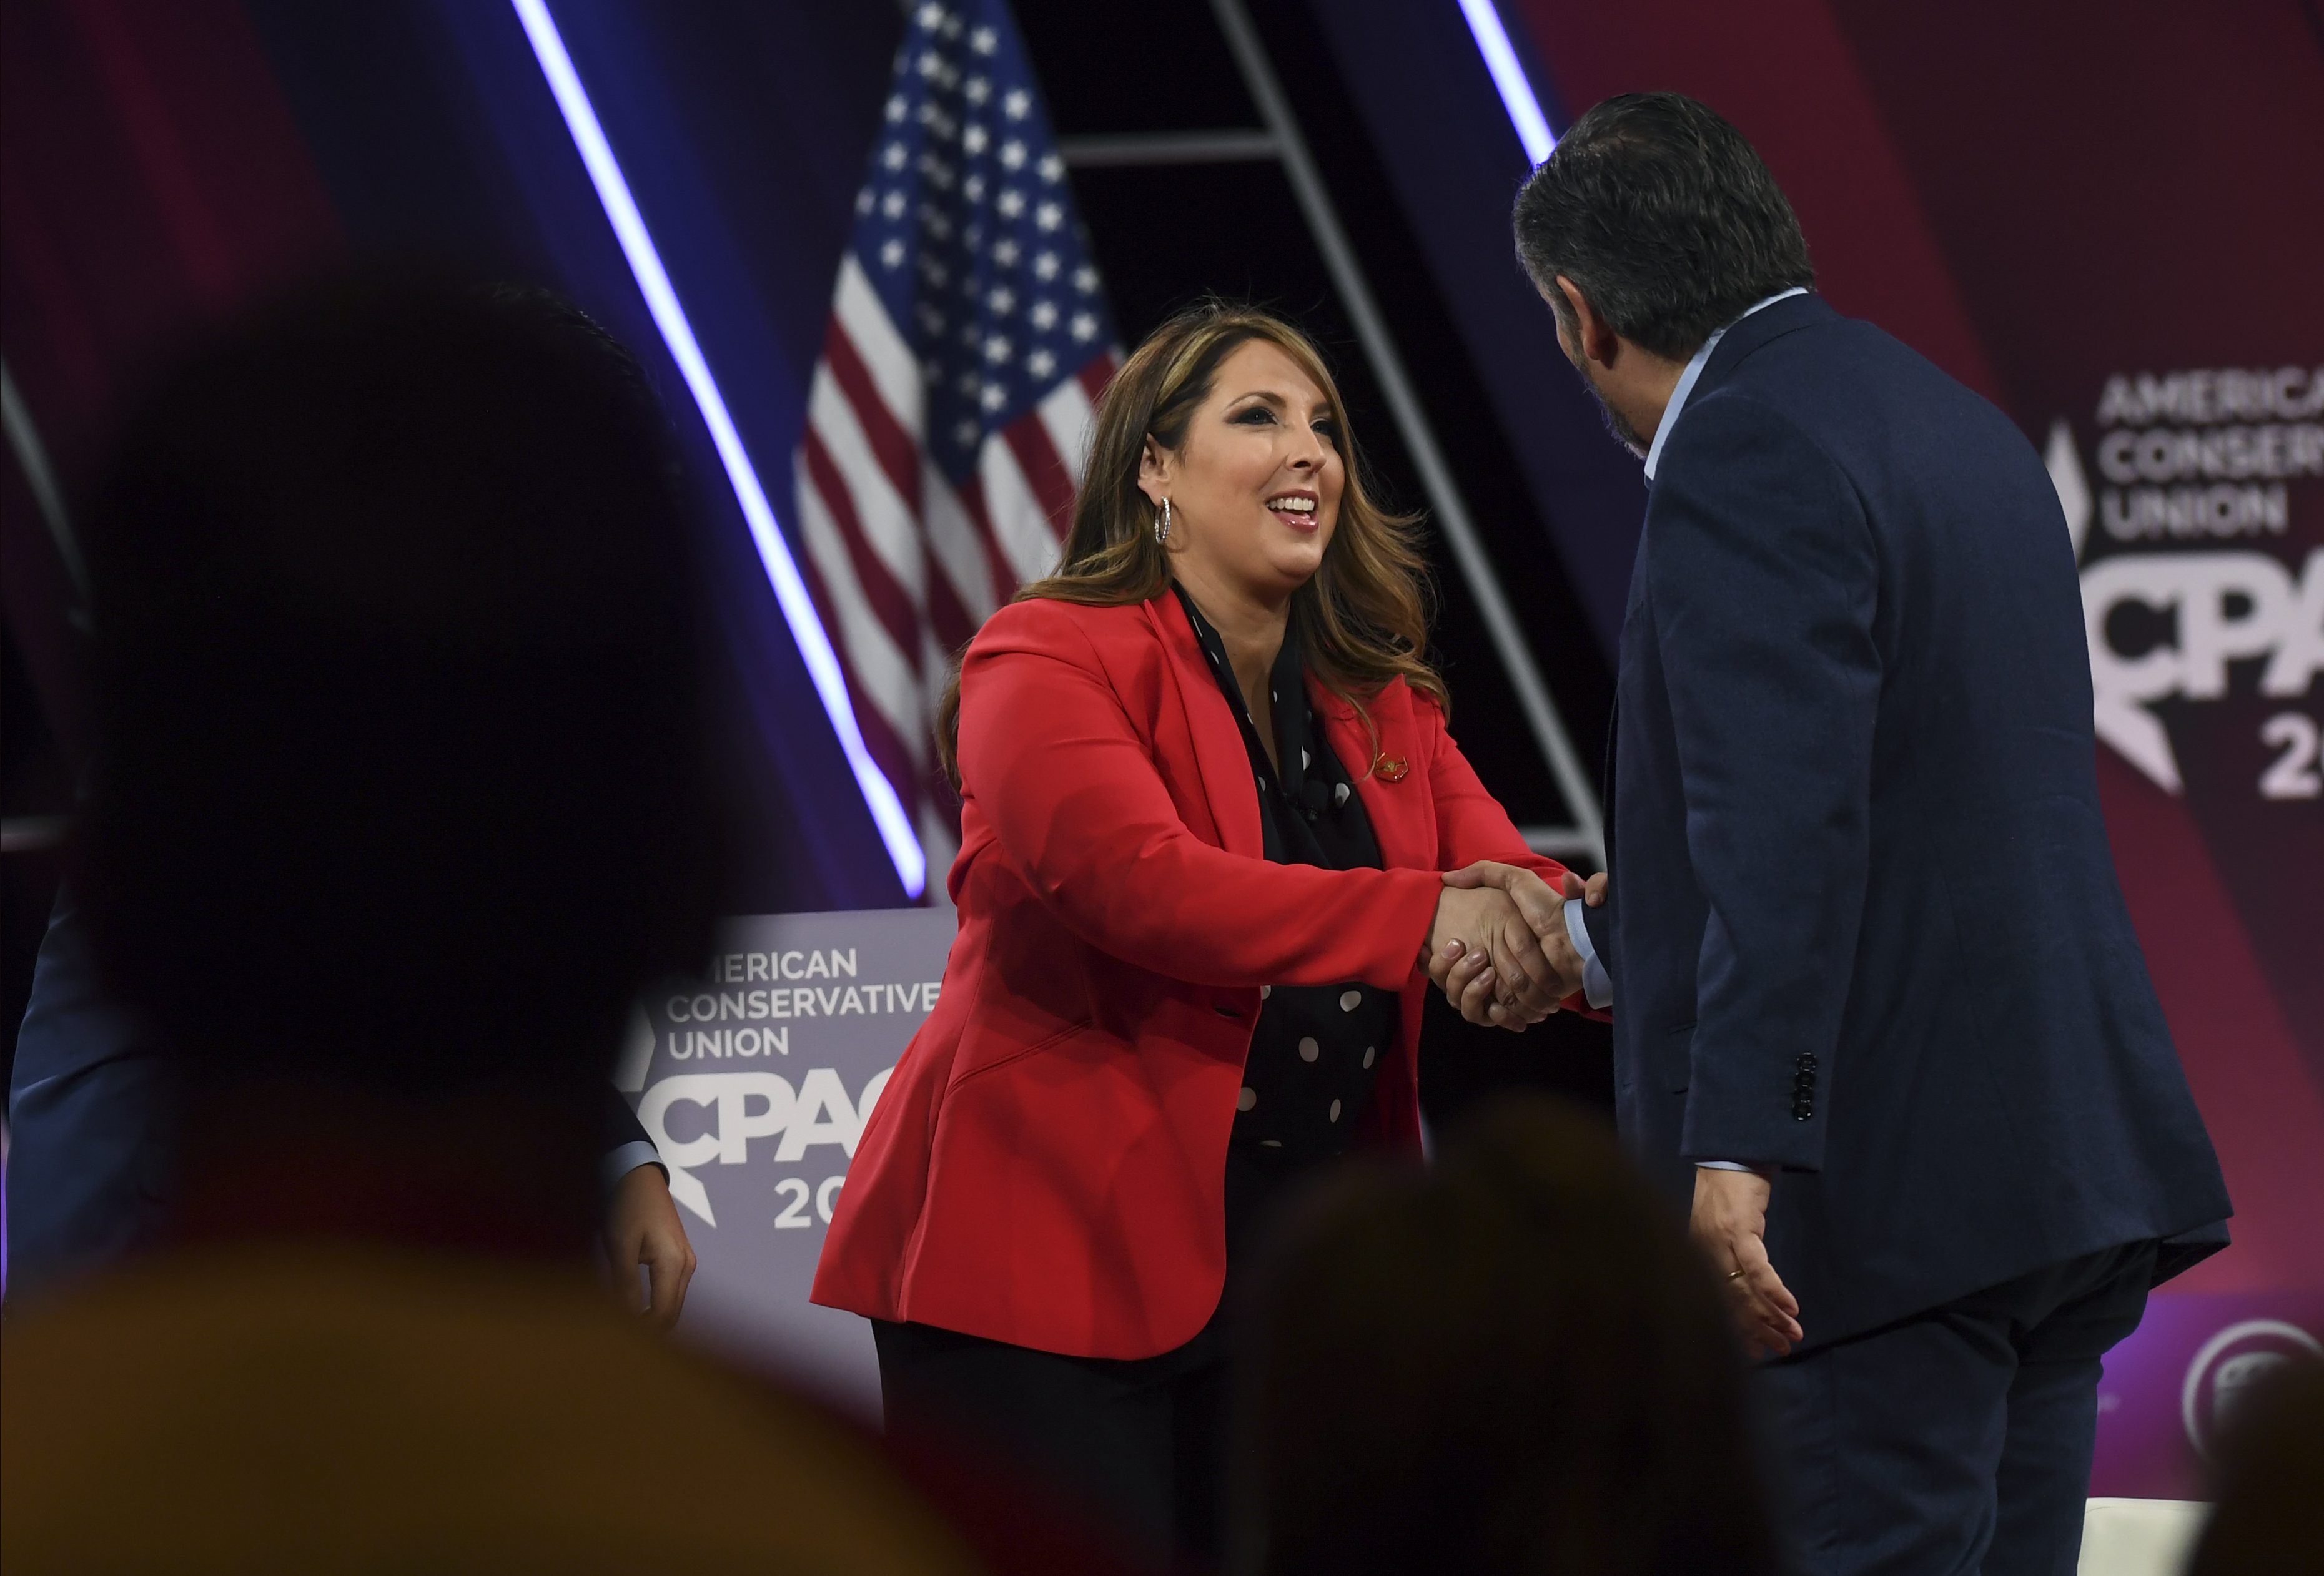 nbc offered ronna mcdaniel a better contract to appear on msnbc